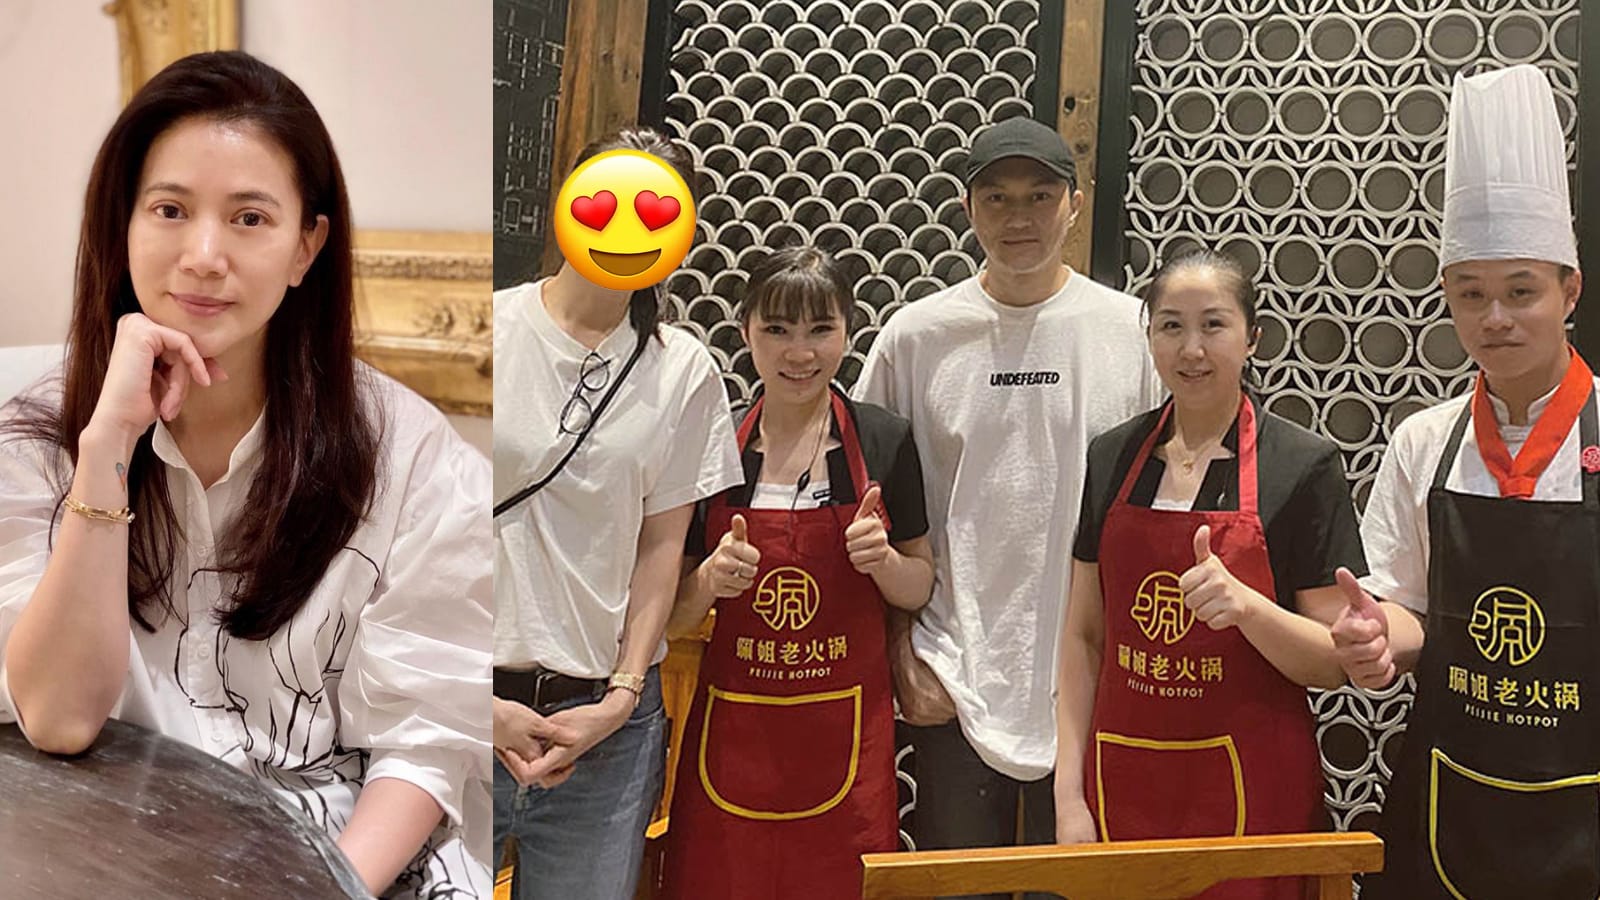 Anita Yuen, 49, Praised For Taking Pic With Hotpot Restaurant Staff With No Make-Up On